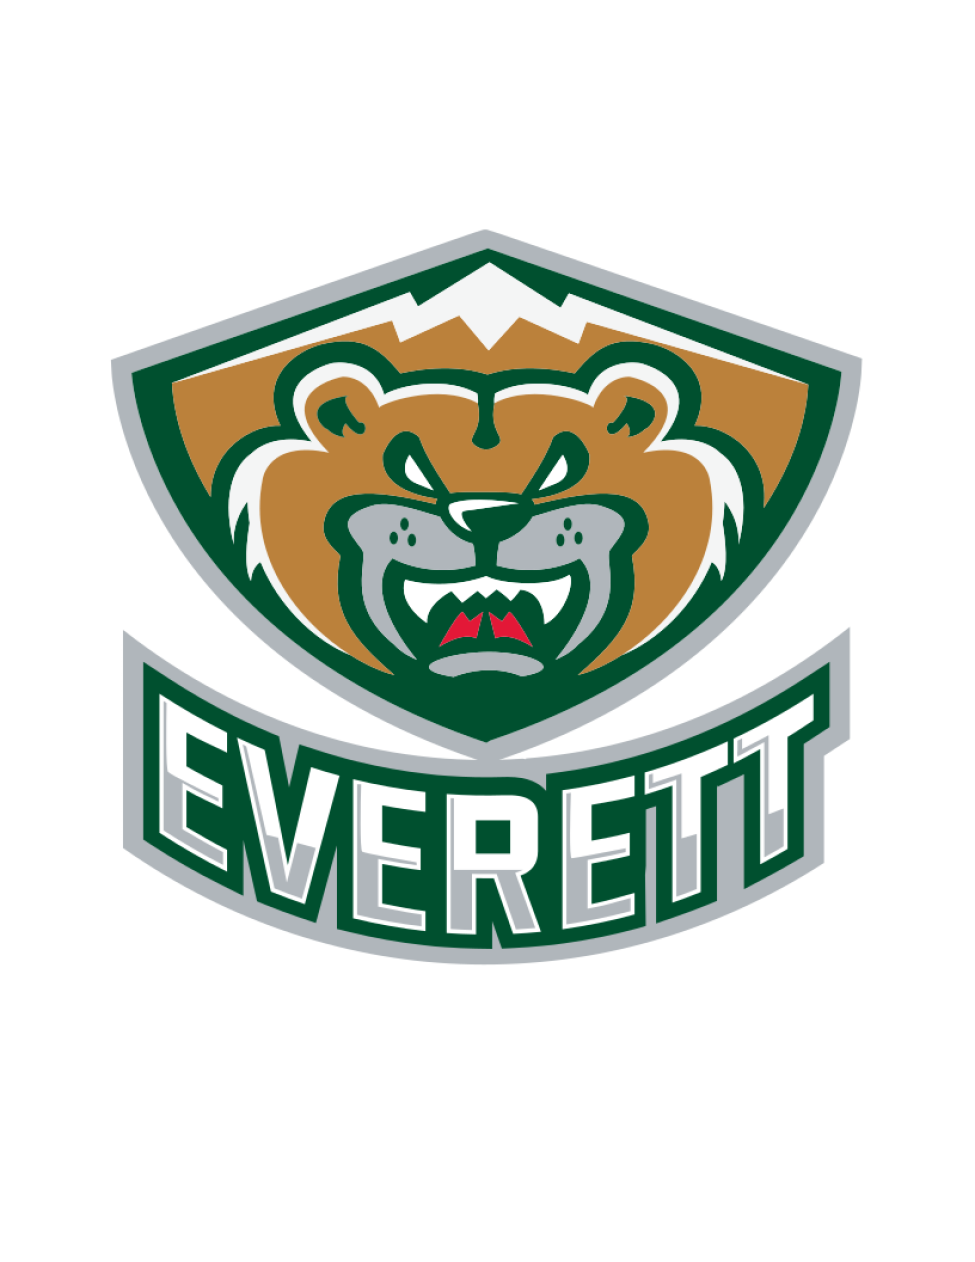 The Everett SIlvertips Logo. A menacing bear growls with mountains in the background.